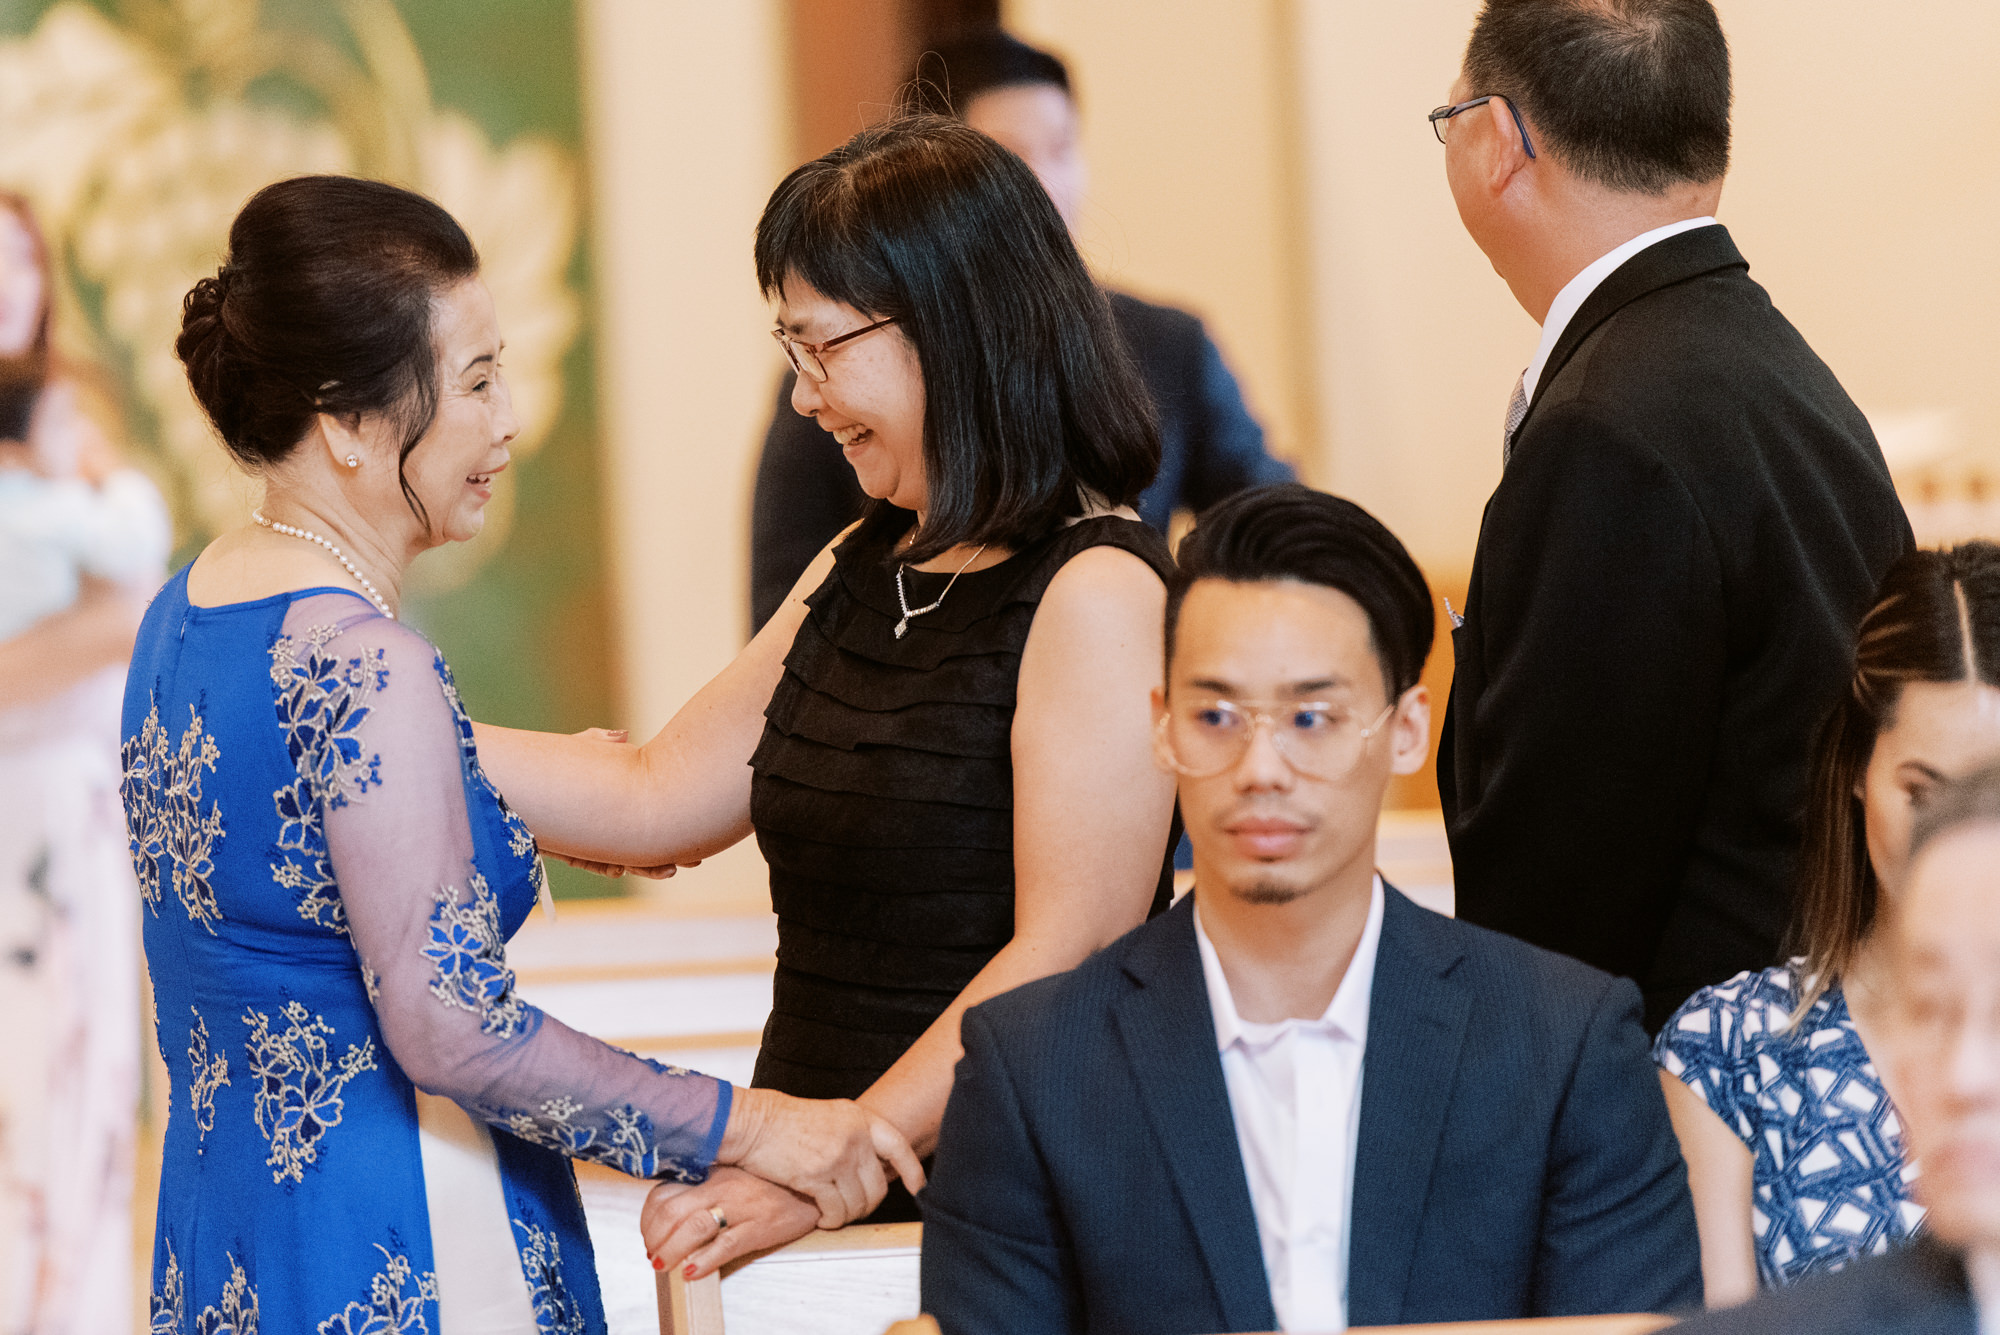 St Anne's Catholic Church wedding: Bride's mom greets guests